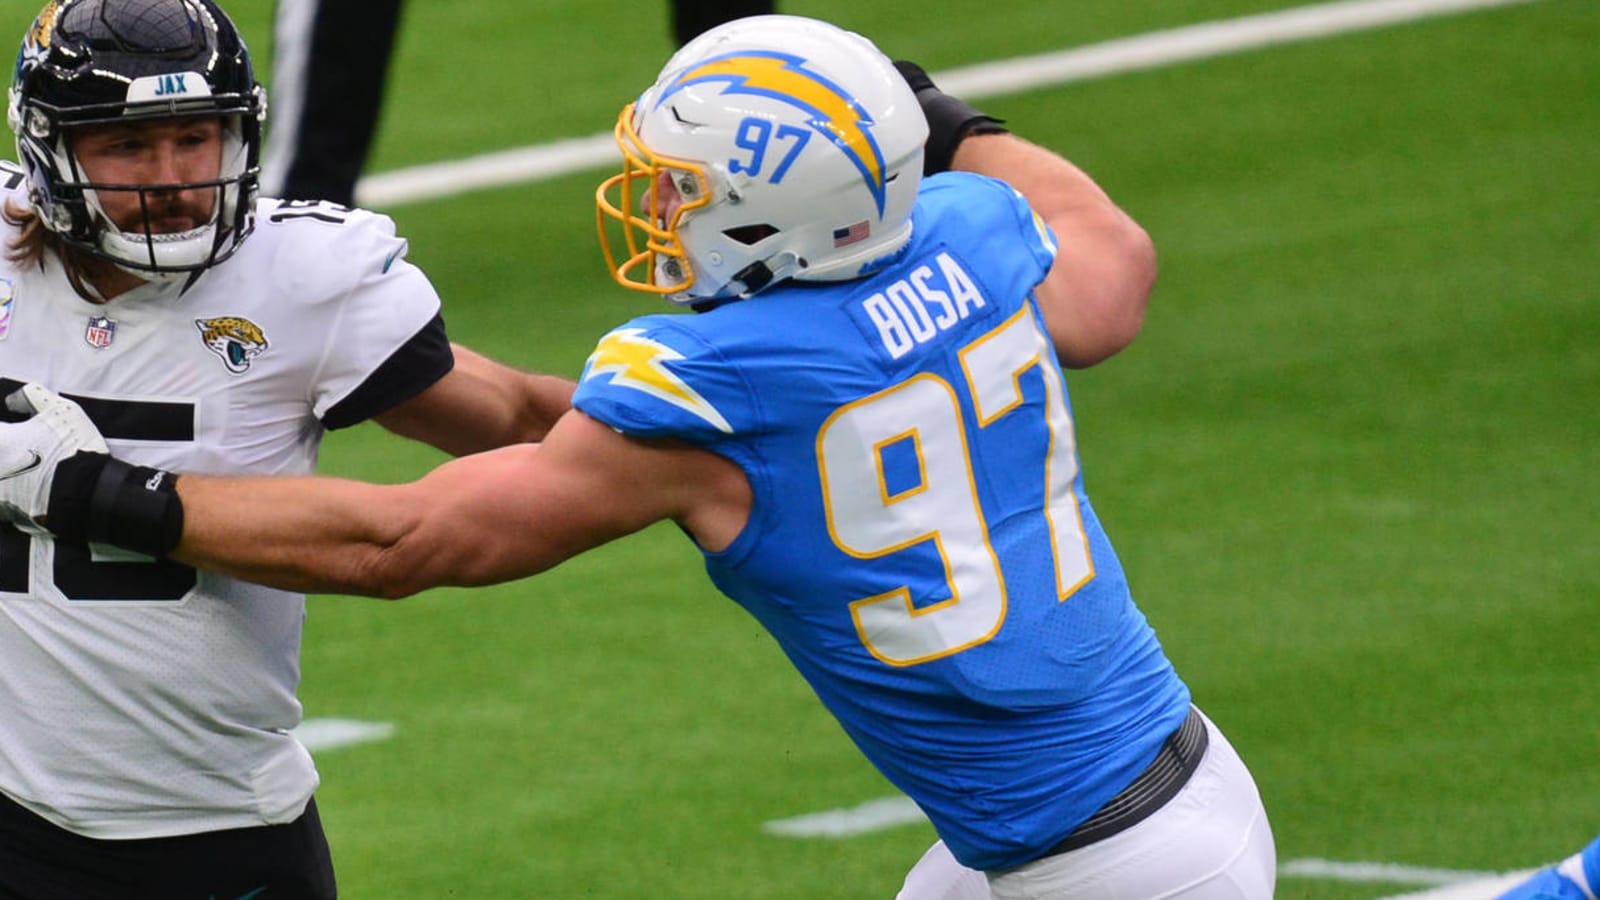 Bosa helped teach Chaisson after game